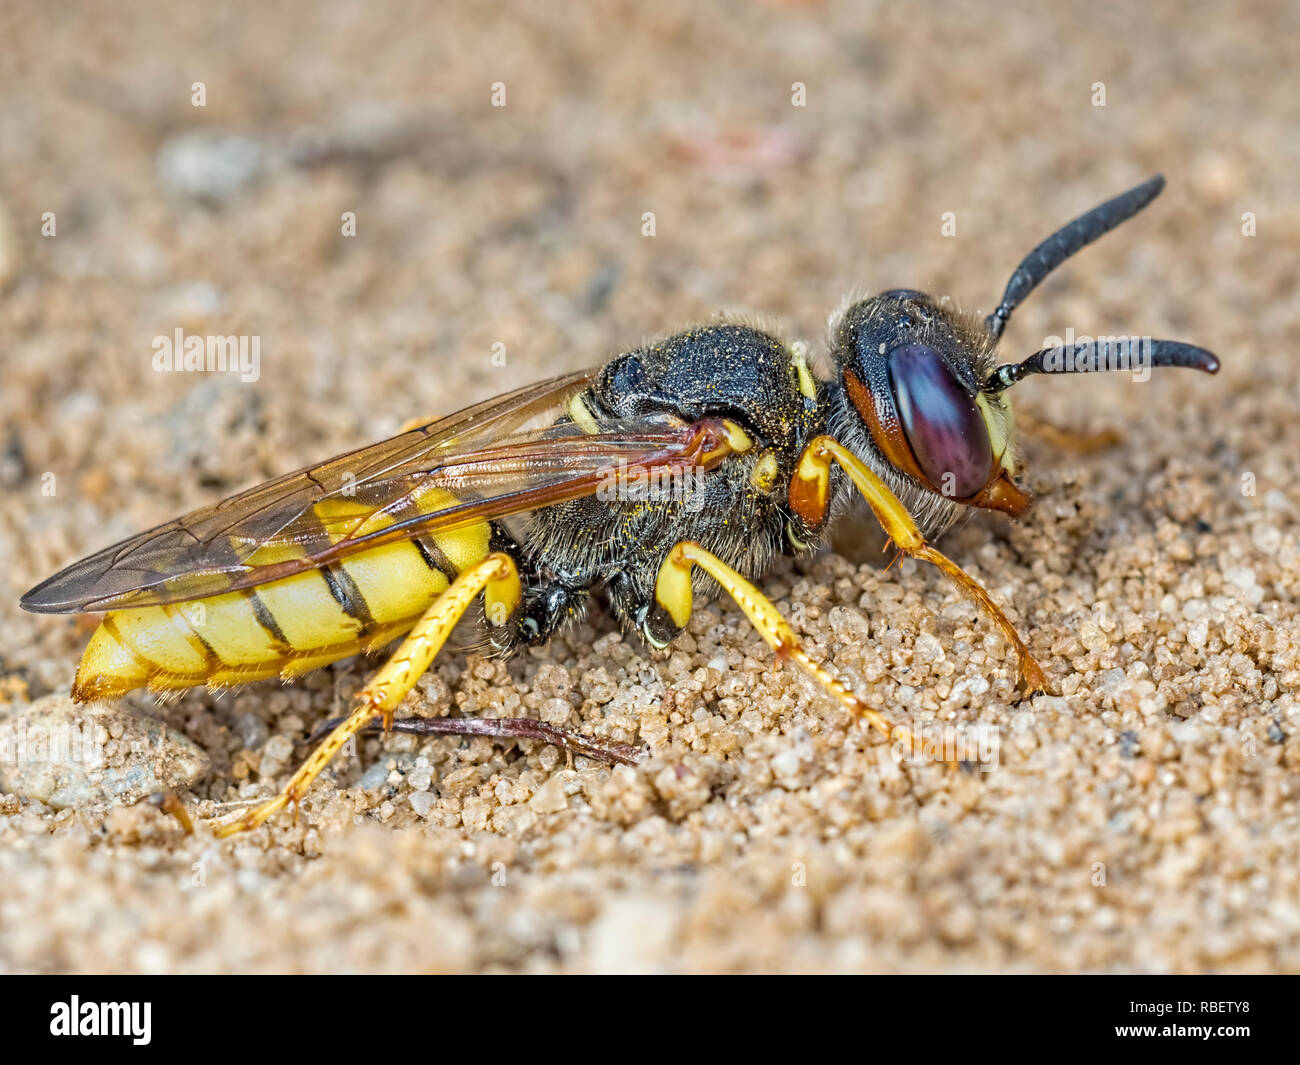 A Female Bee-Wolf (Philanthus triangulum) a member of the Digger Wasps (Crabronidae). Wasp Family Vespidae. Stock Photo